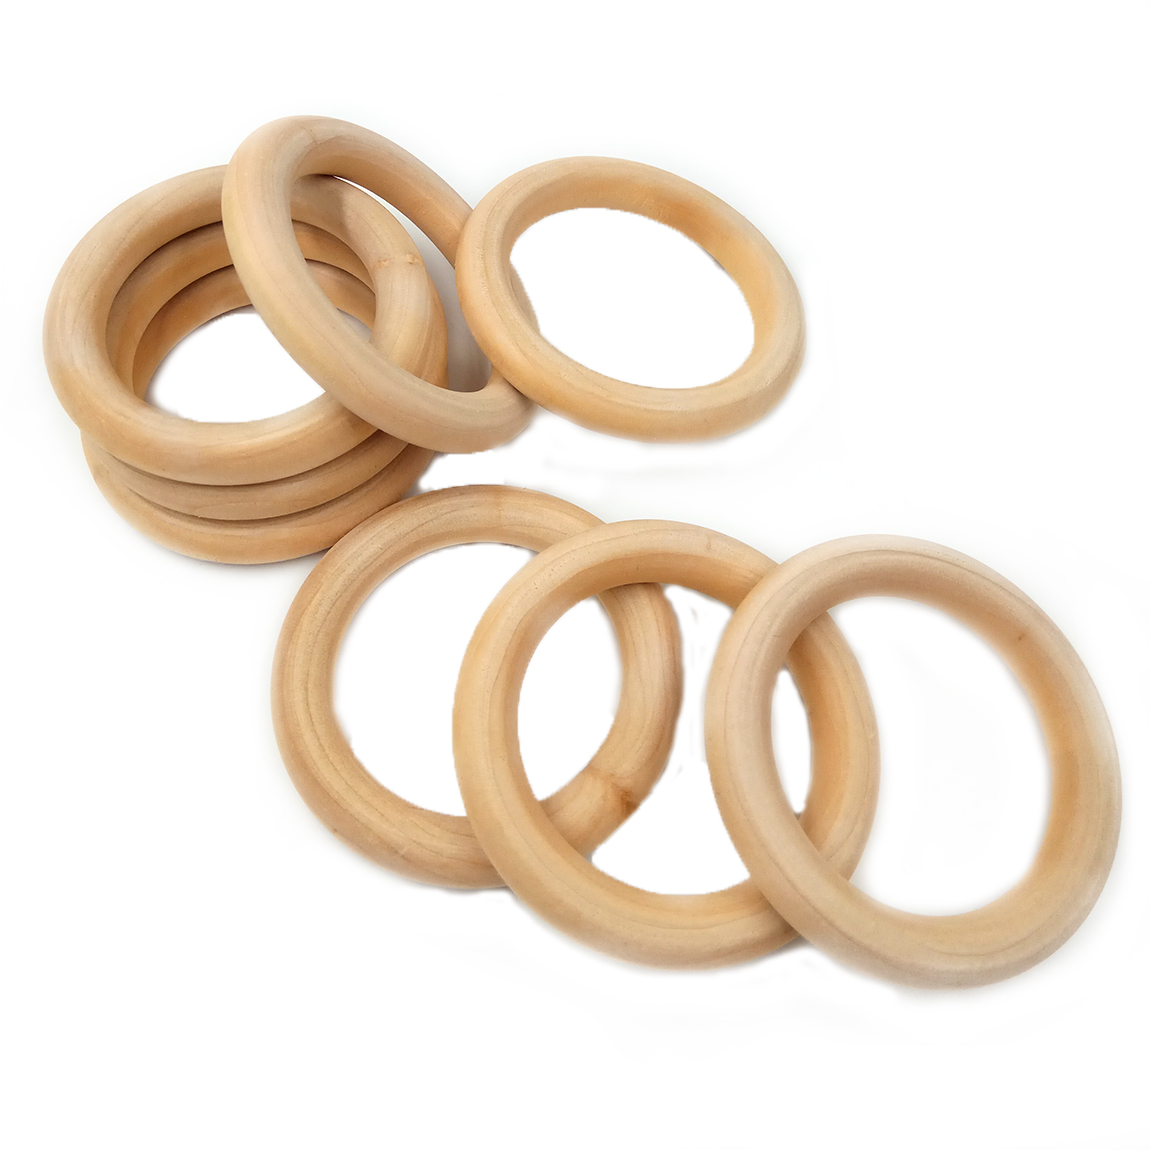 

68mm(2.68inch) Nature Wooden Ring Teether Montessori Baby Toy Organic Infant Teething Toy Accessories Necklace DIY Baby Teether